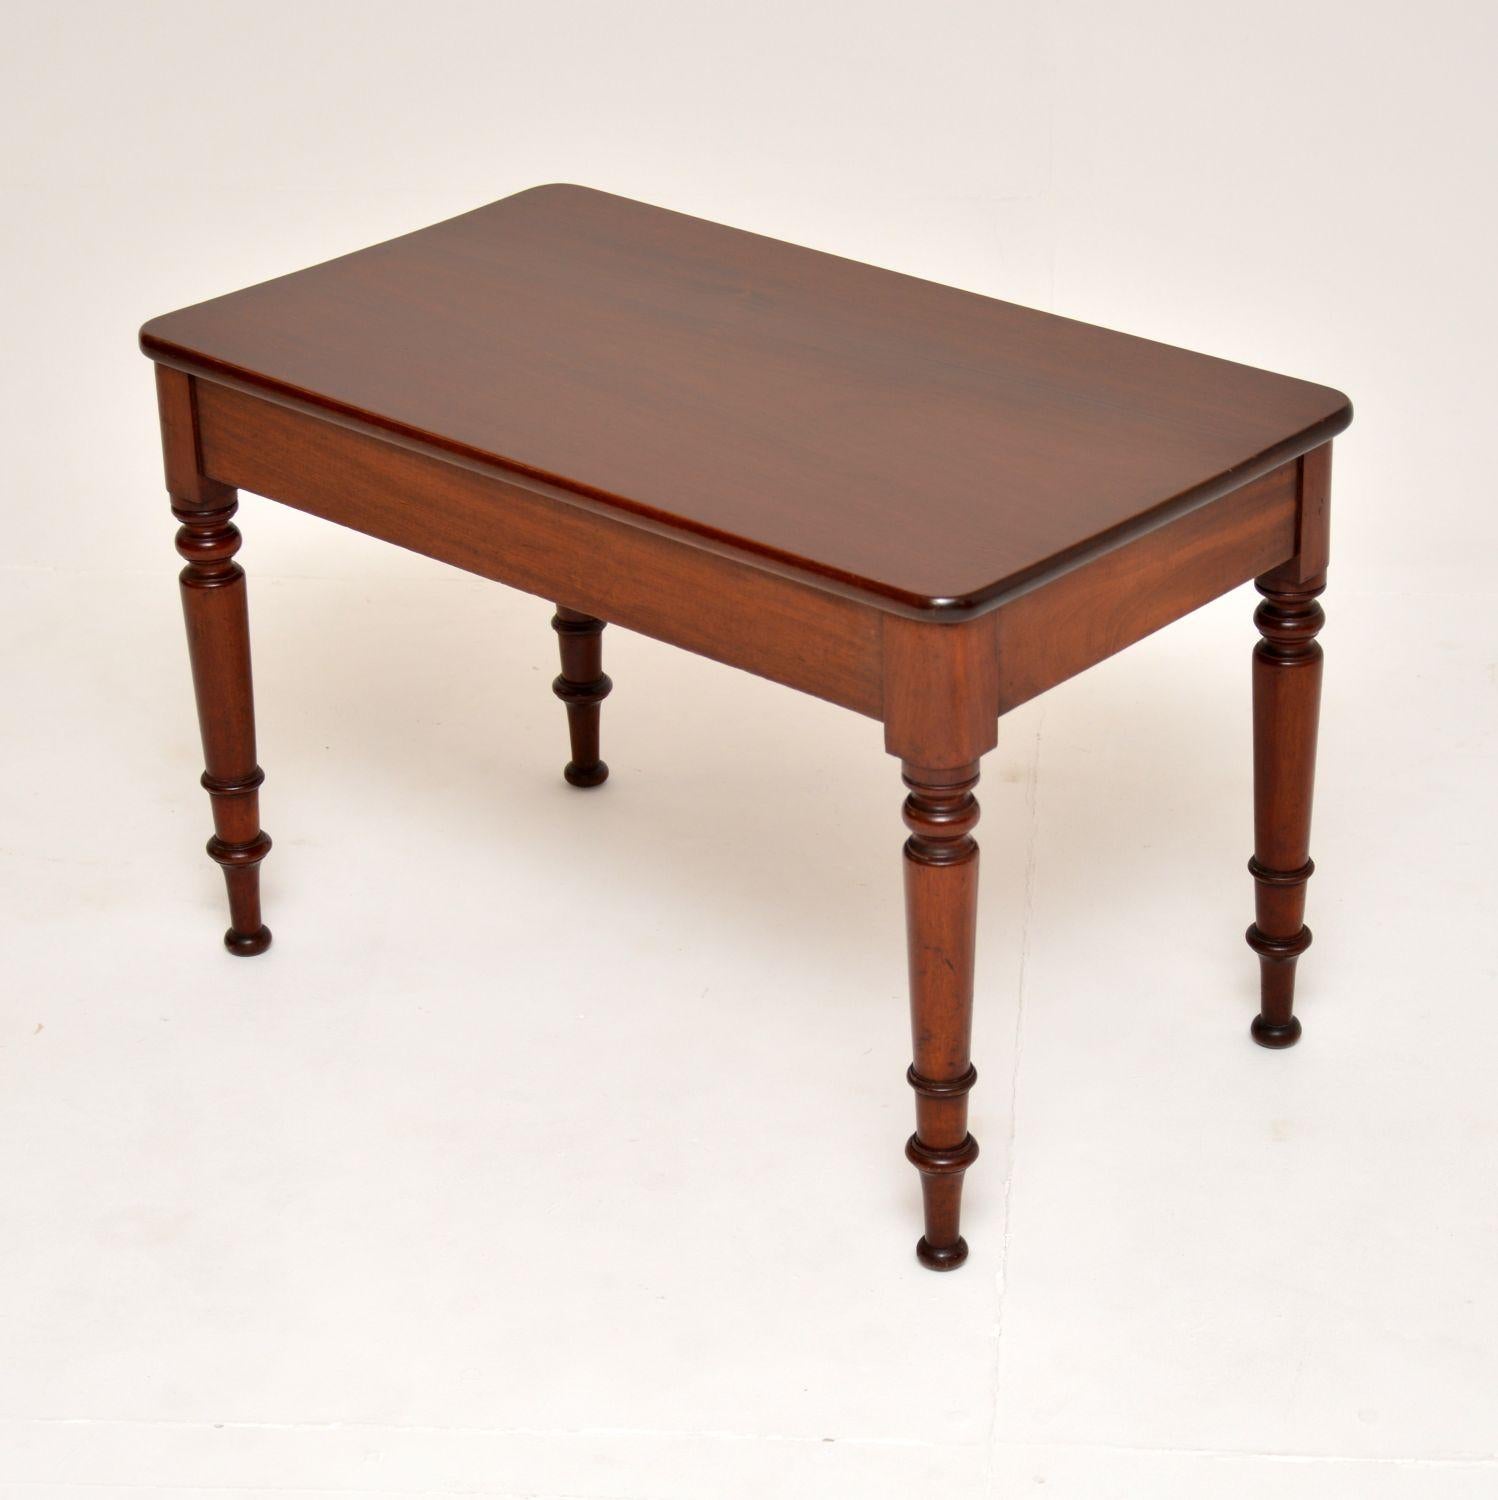 English Antique Victorian Coffee Table / Stool